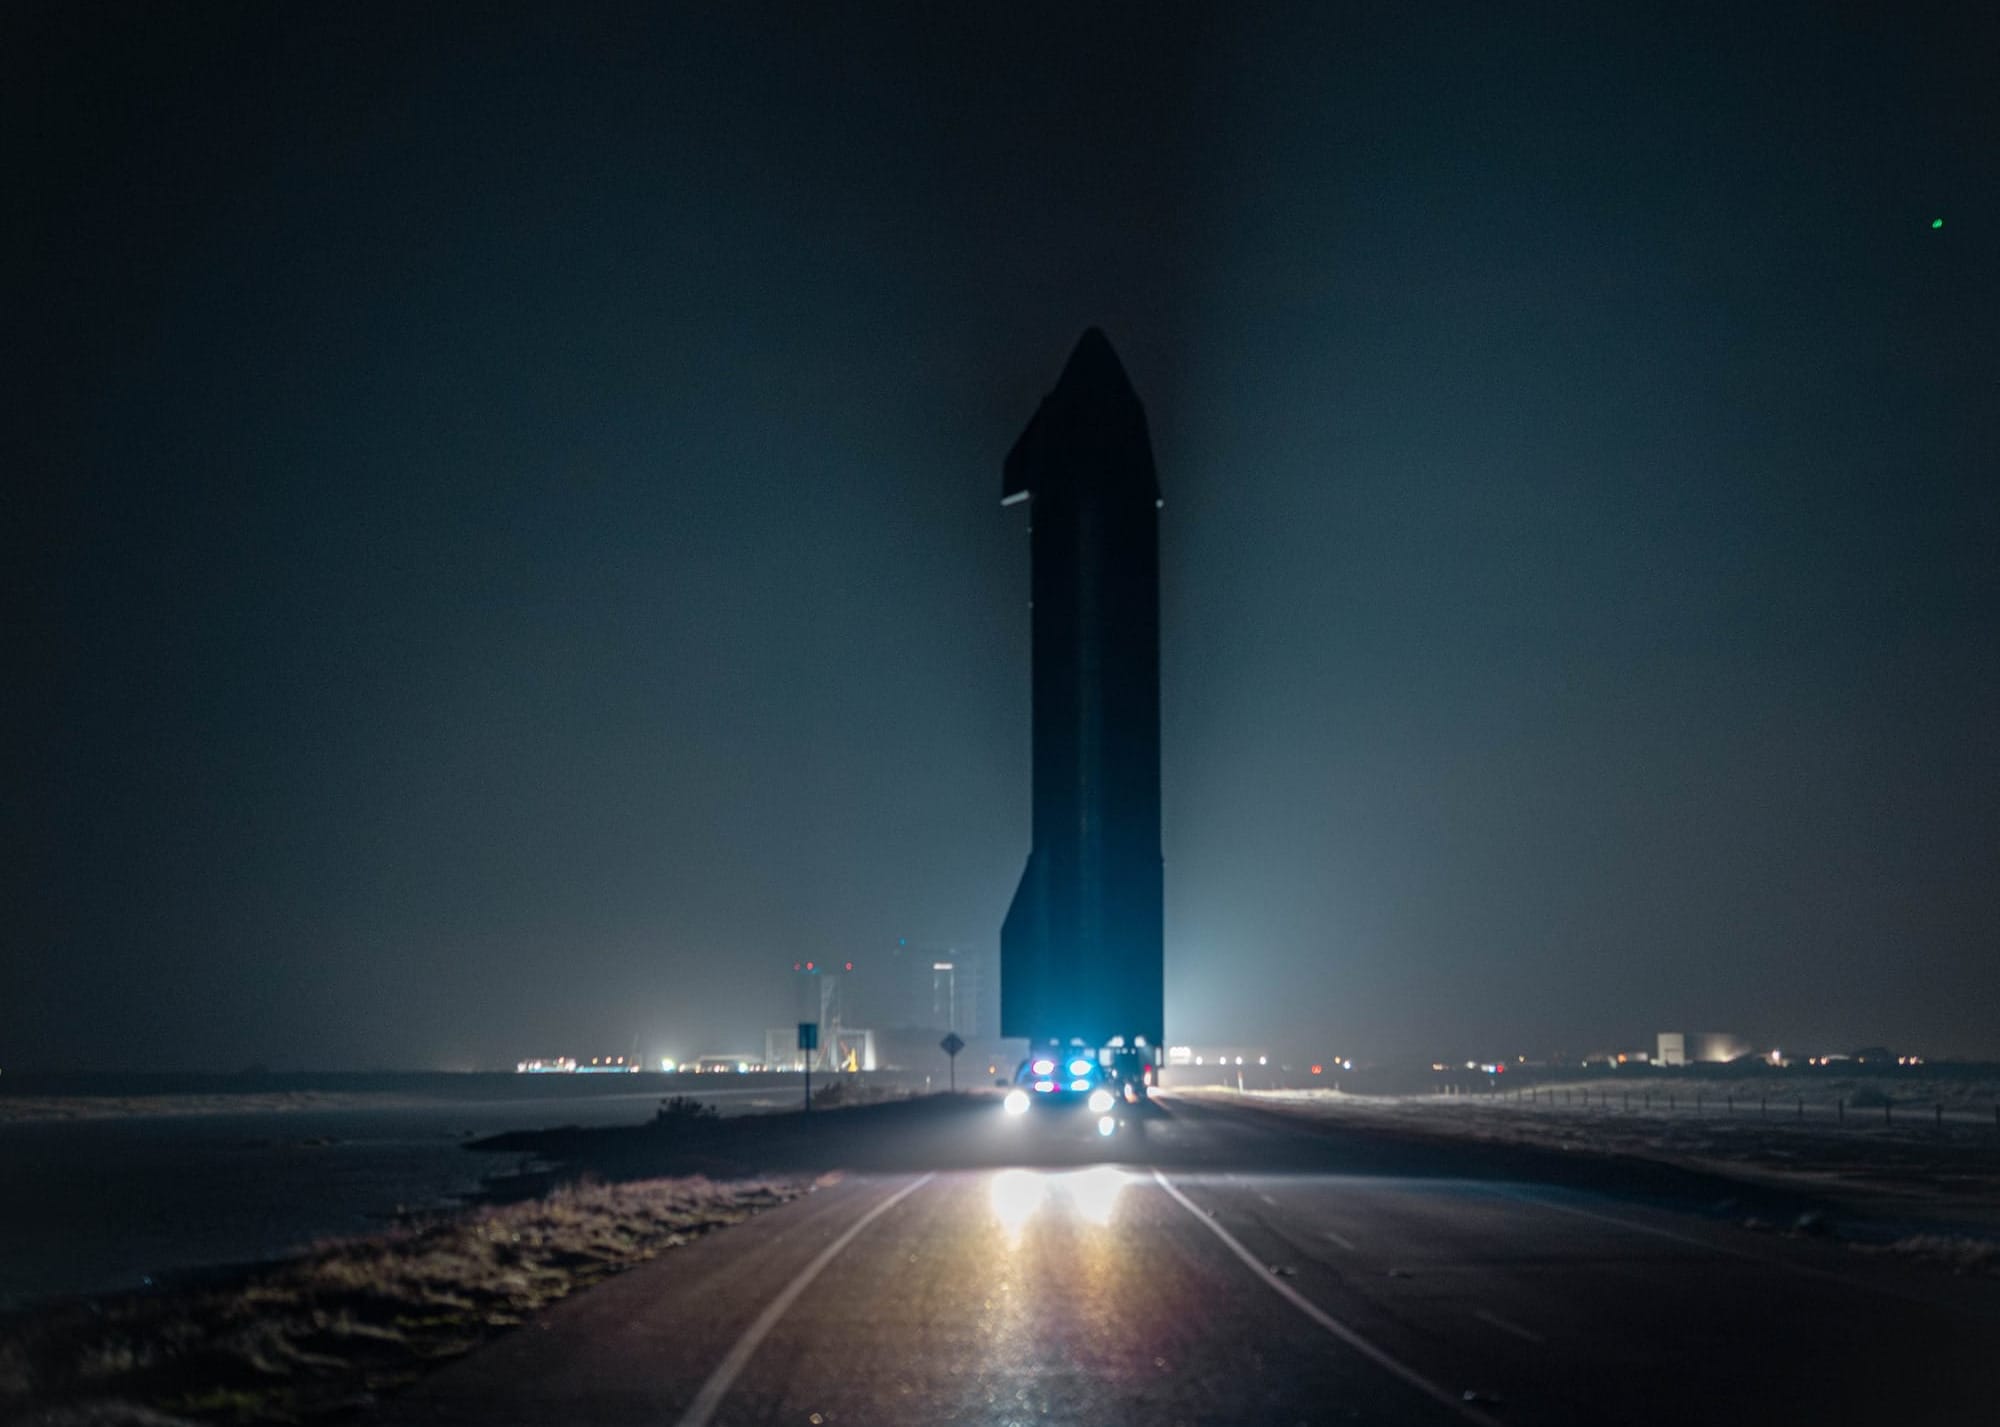 Ship 28 heading towards the launch site. ©SpaceX